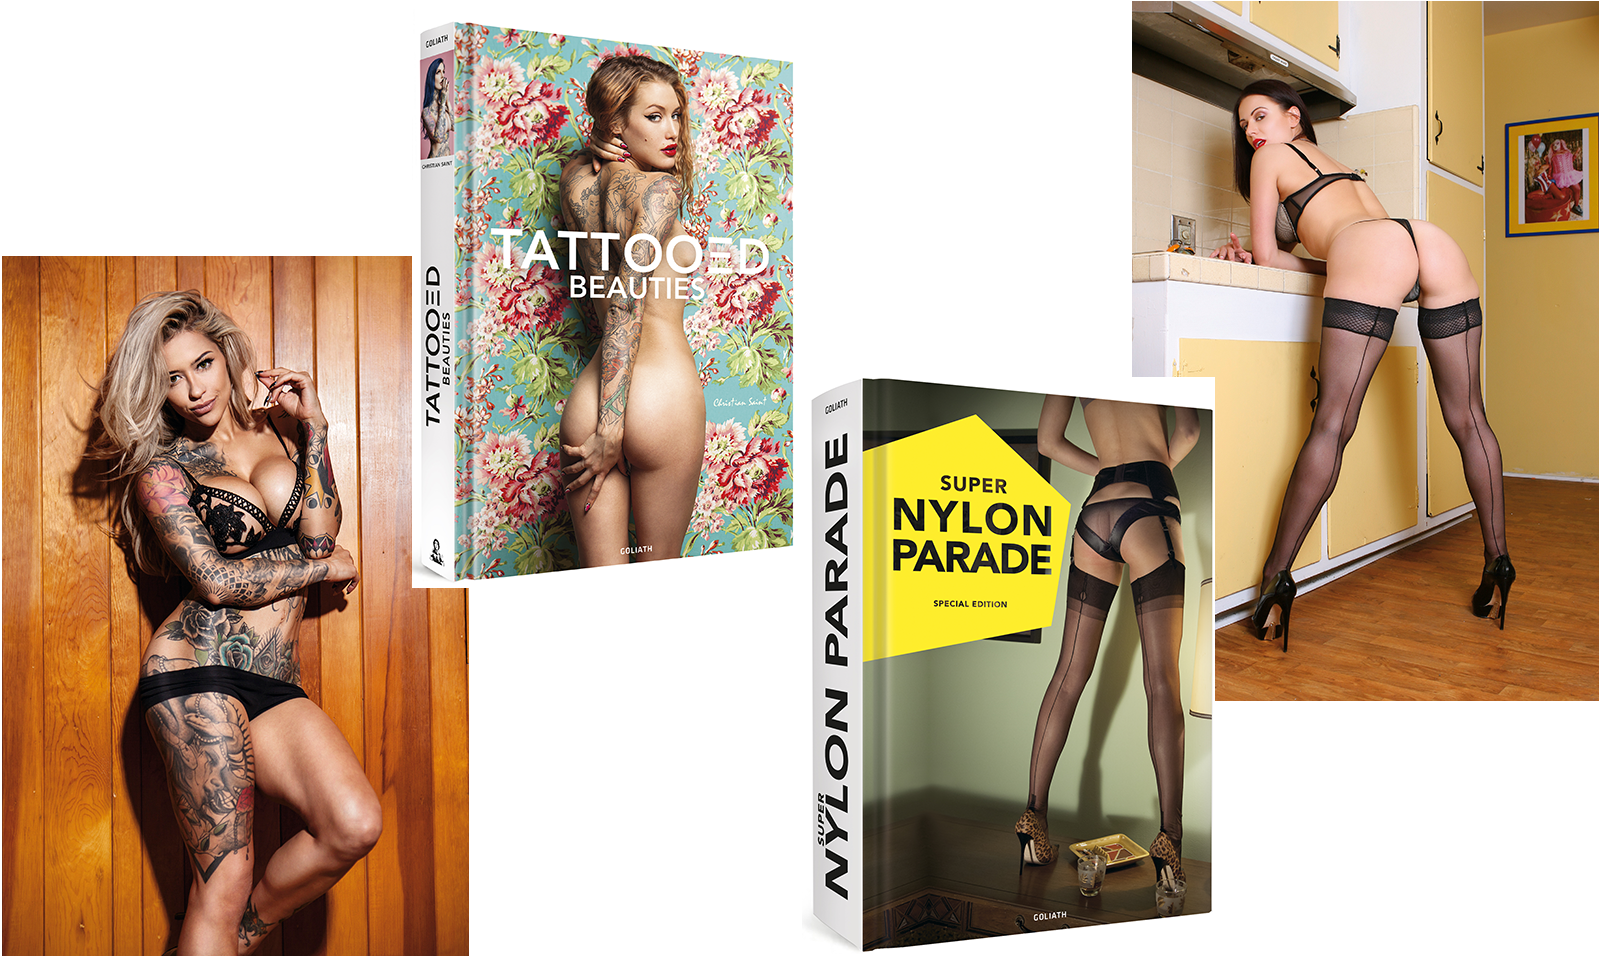 New Goliath Books Feature Glamour Photos of Tattoos and Nylons